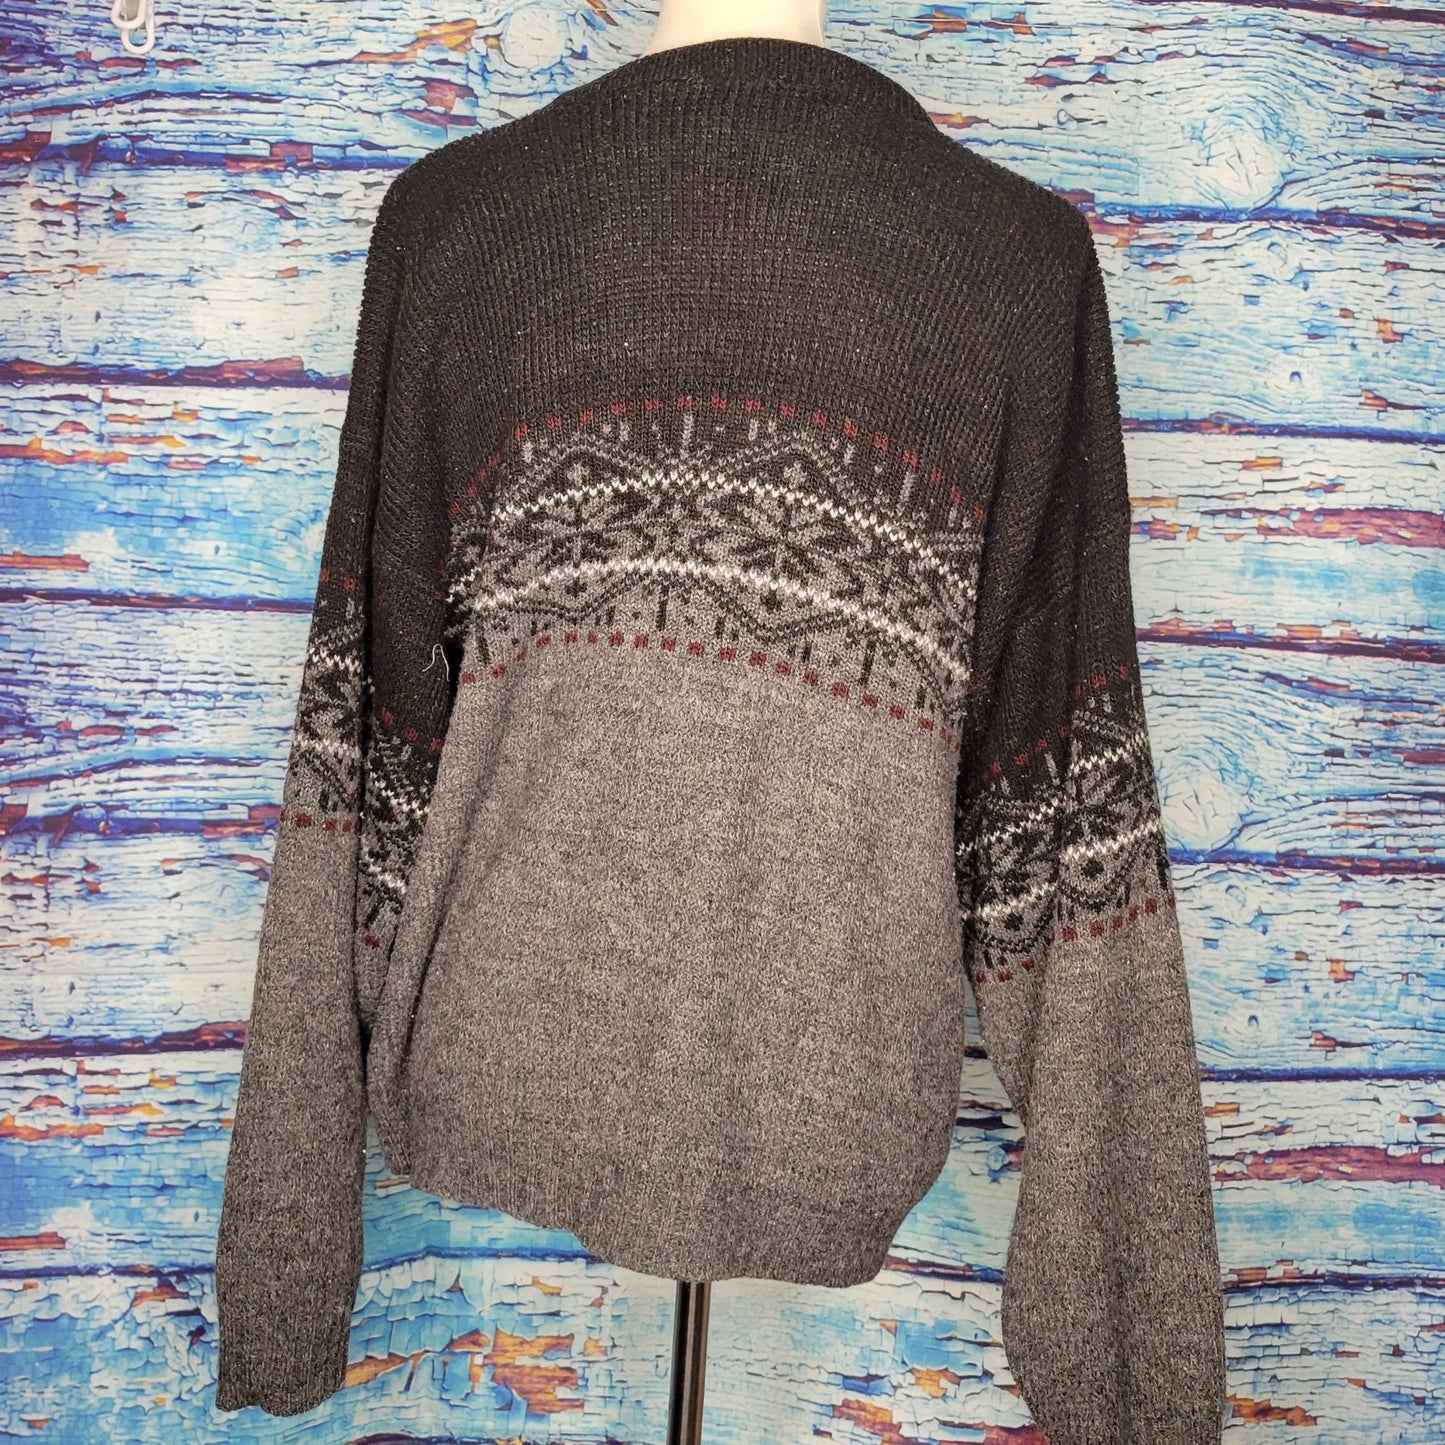 Vintage Men's 80's 90's Old Man Sweater by Scandia